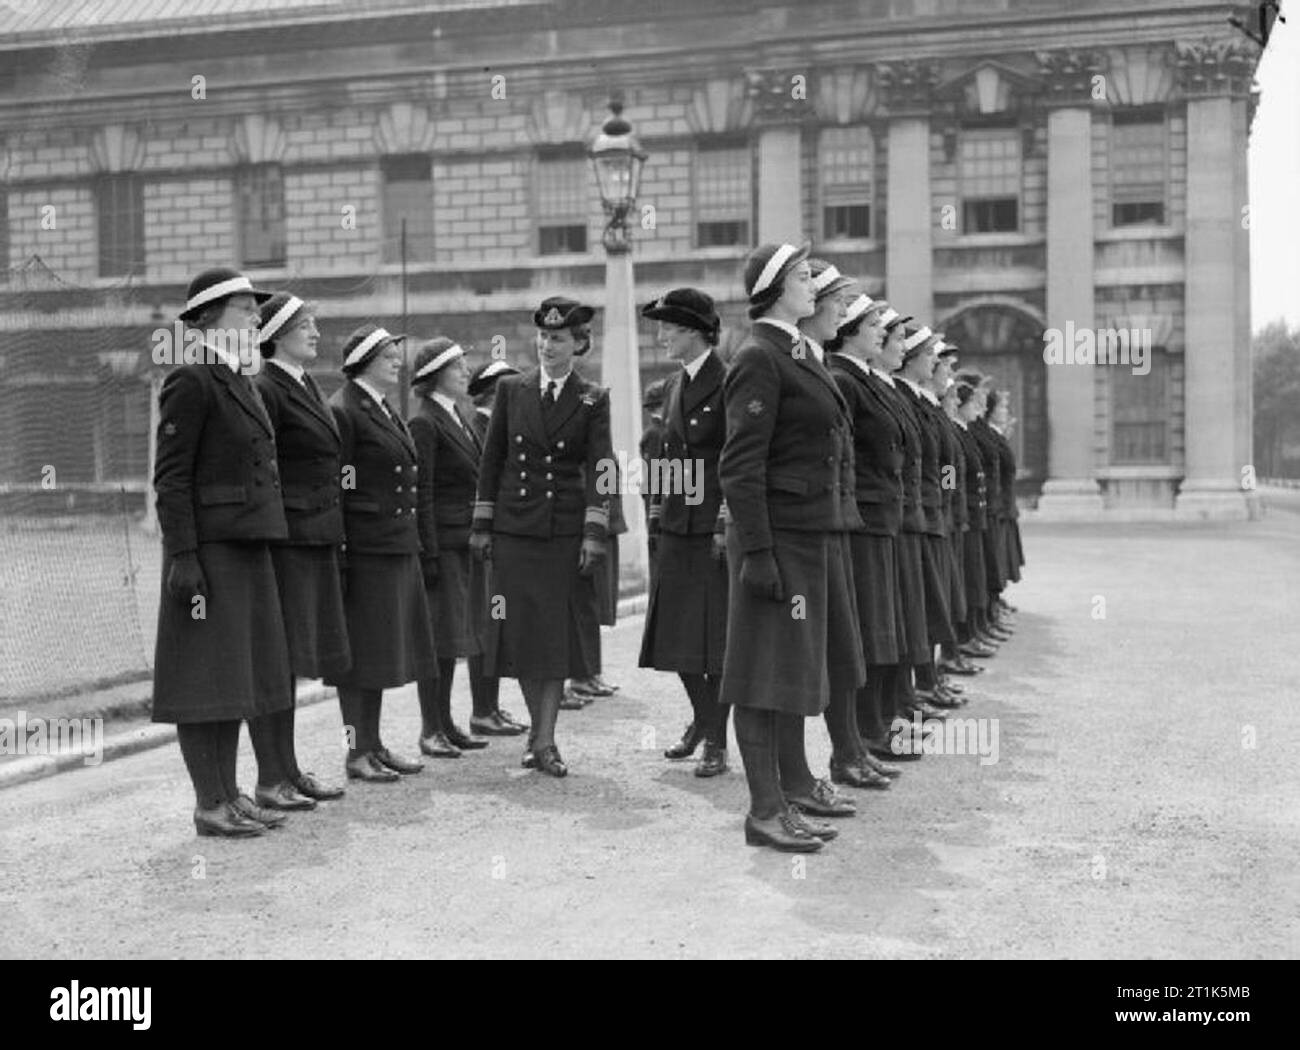 Hrh the Duchess of Kent Visits Greenwich To Inspect Wrens, 1941. The Duchess inspecting Cadets of the WRNS Officers' Training Course. Stock Photo